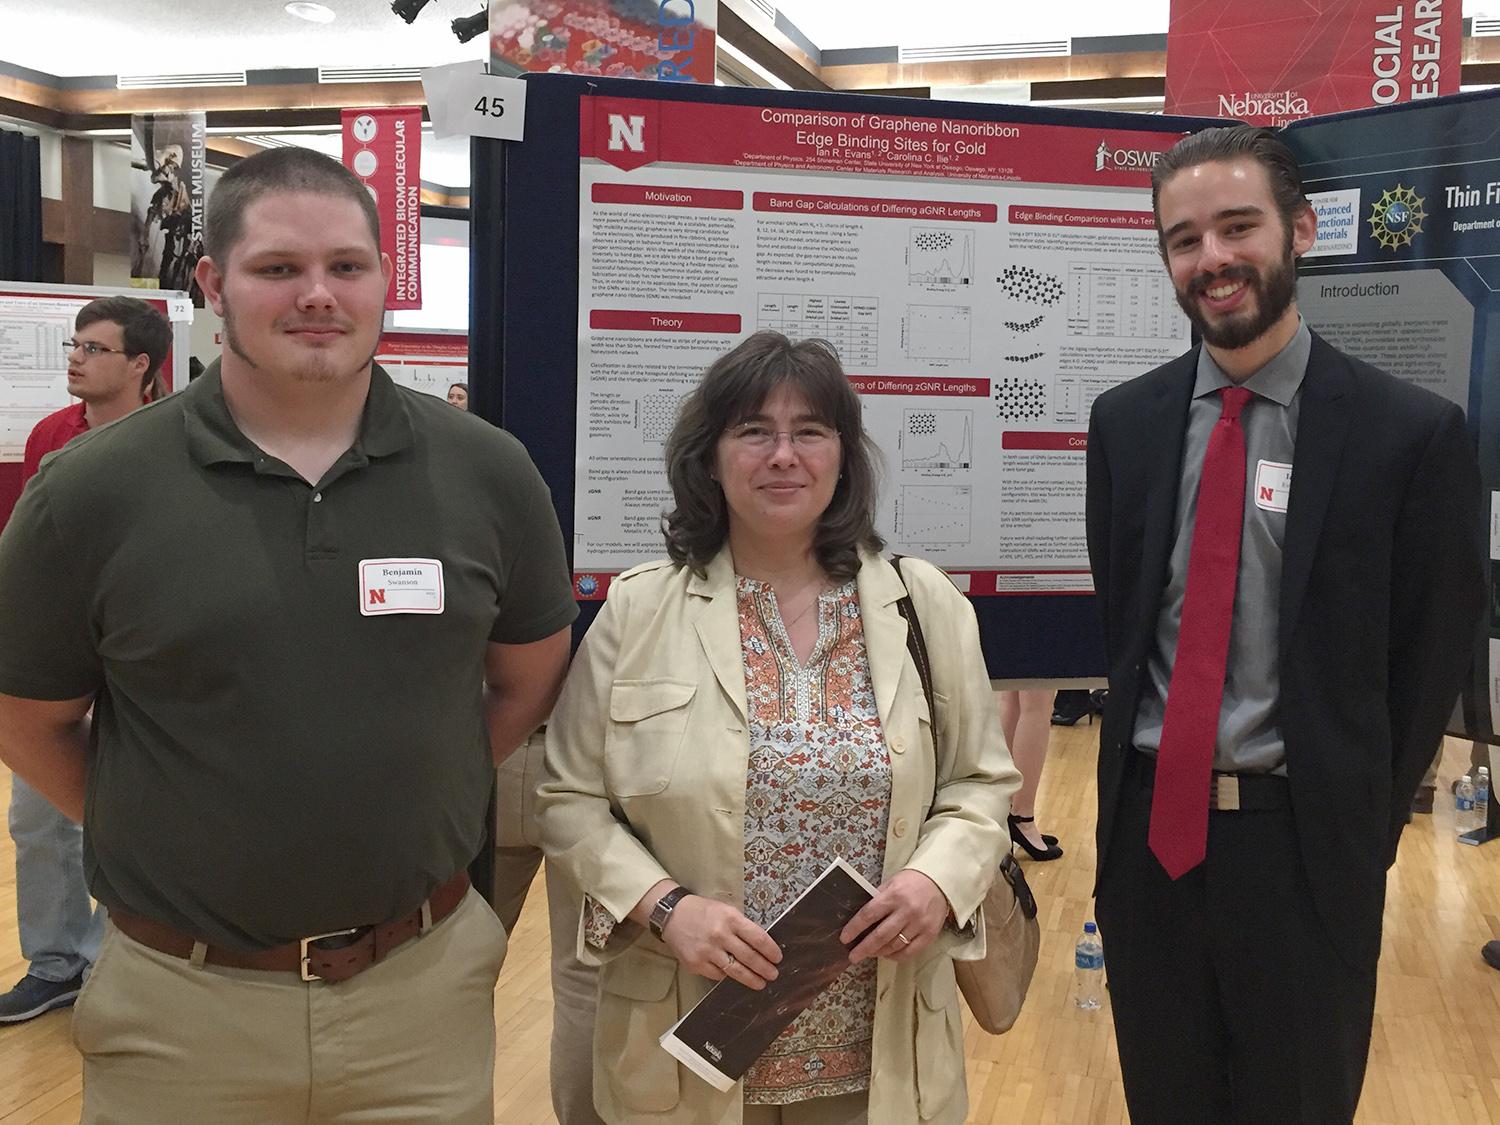 Benjamin Swanson, Carolie Ilie and Ian Evans with research poster